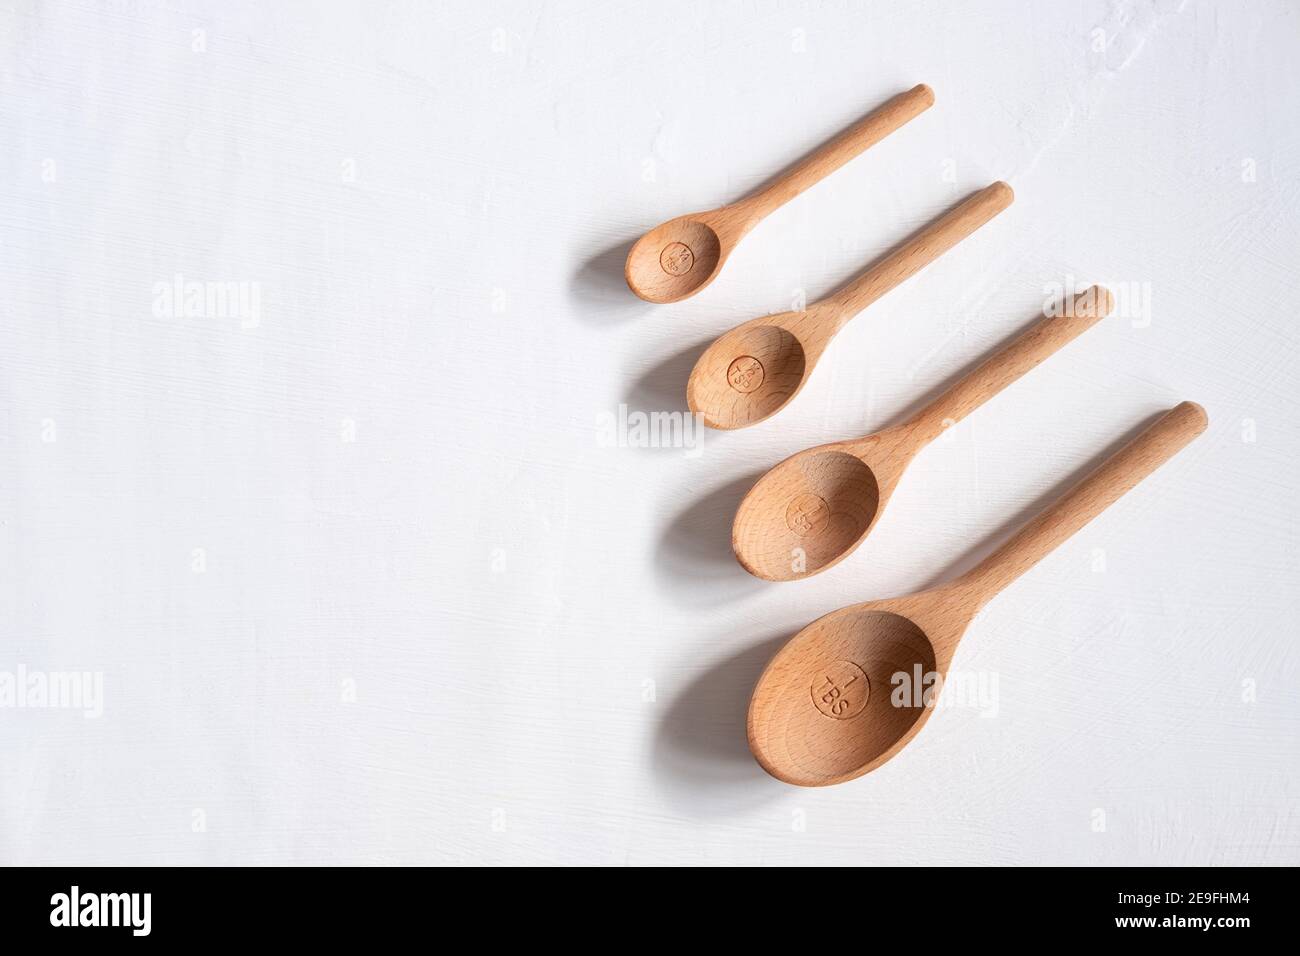 Wooden measuring spoons on a white background with copyspace Stock Photo